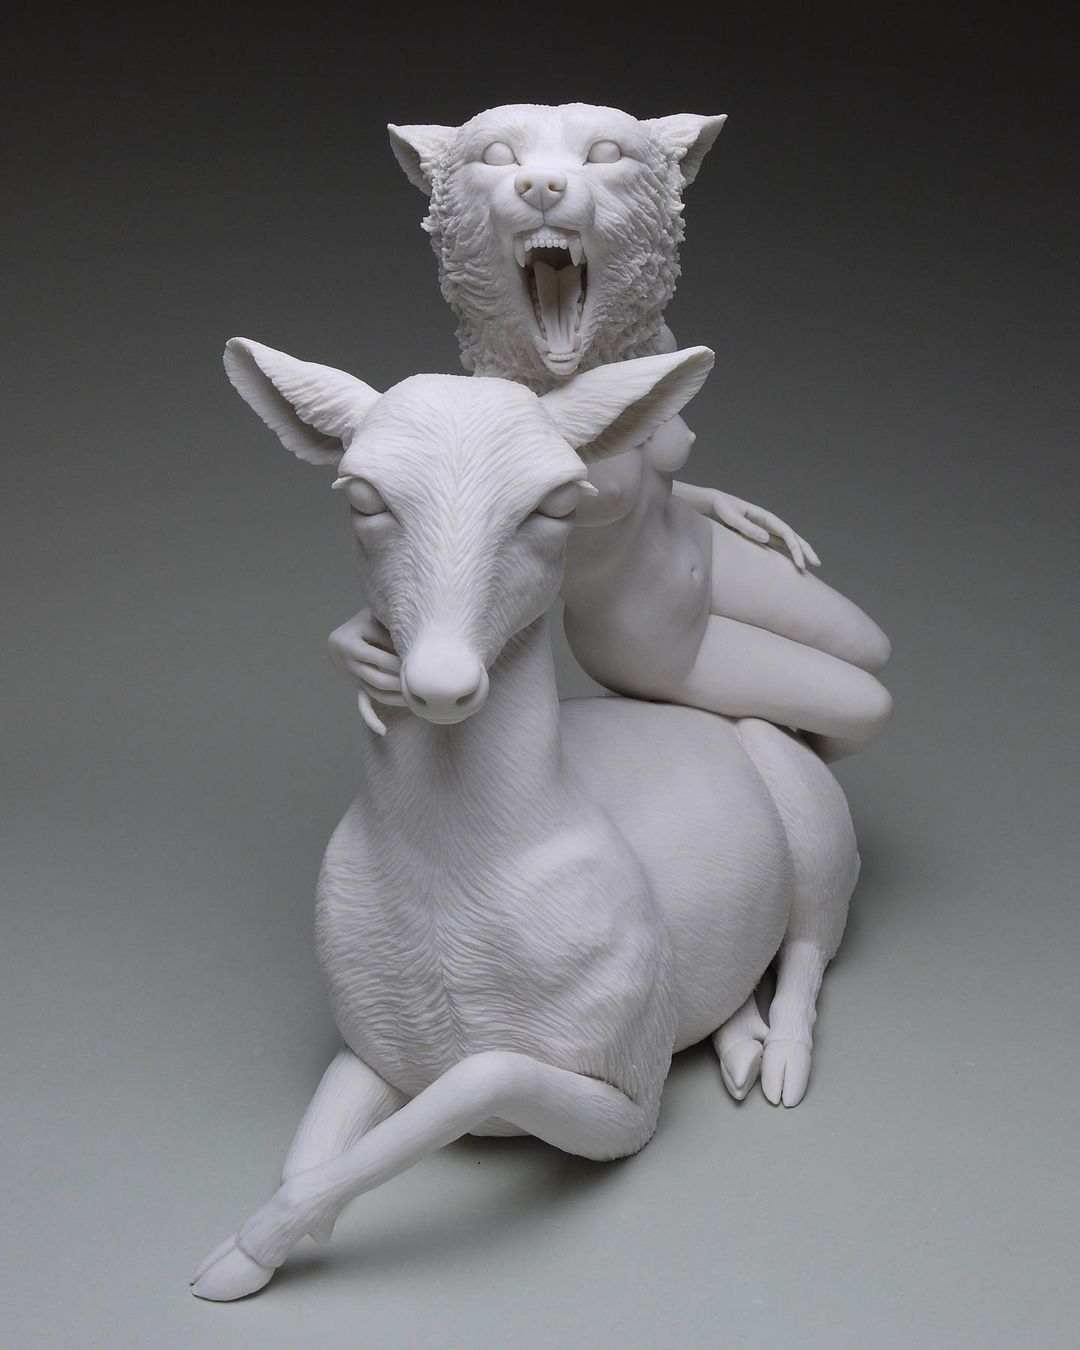 Fabulous Sculptures Of Human Animal Hybrids By Crystal Morey 5